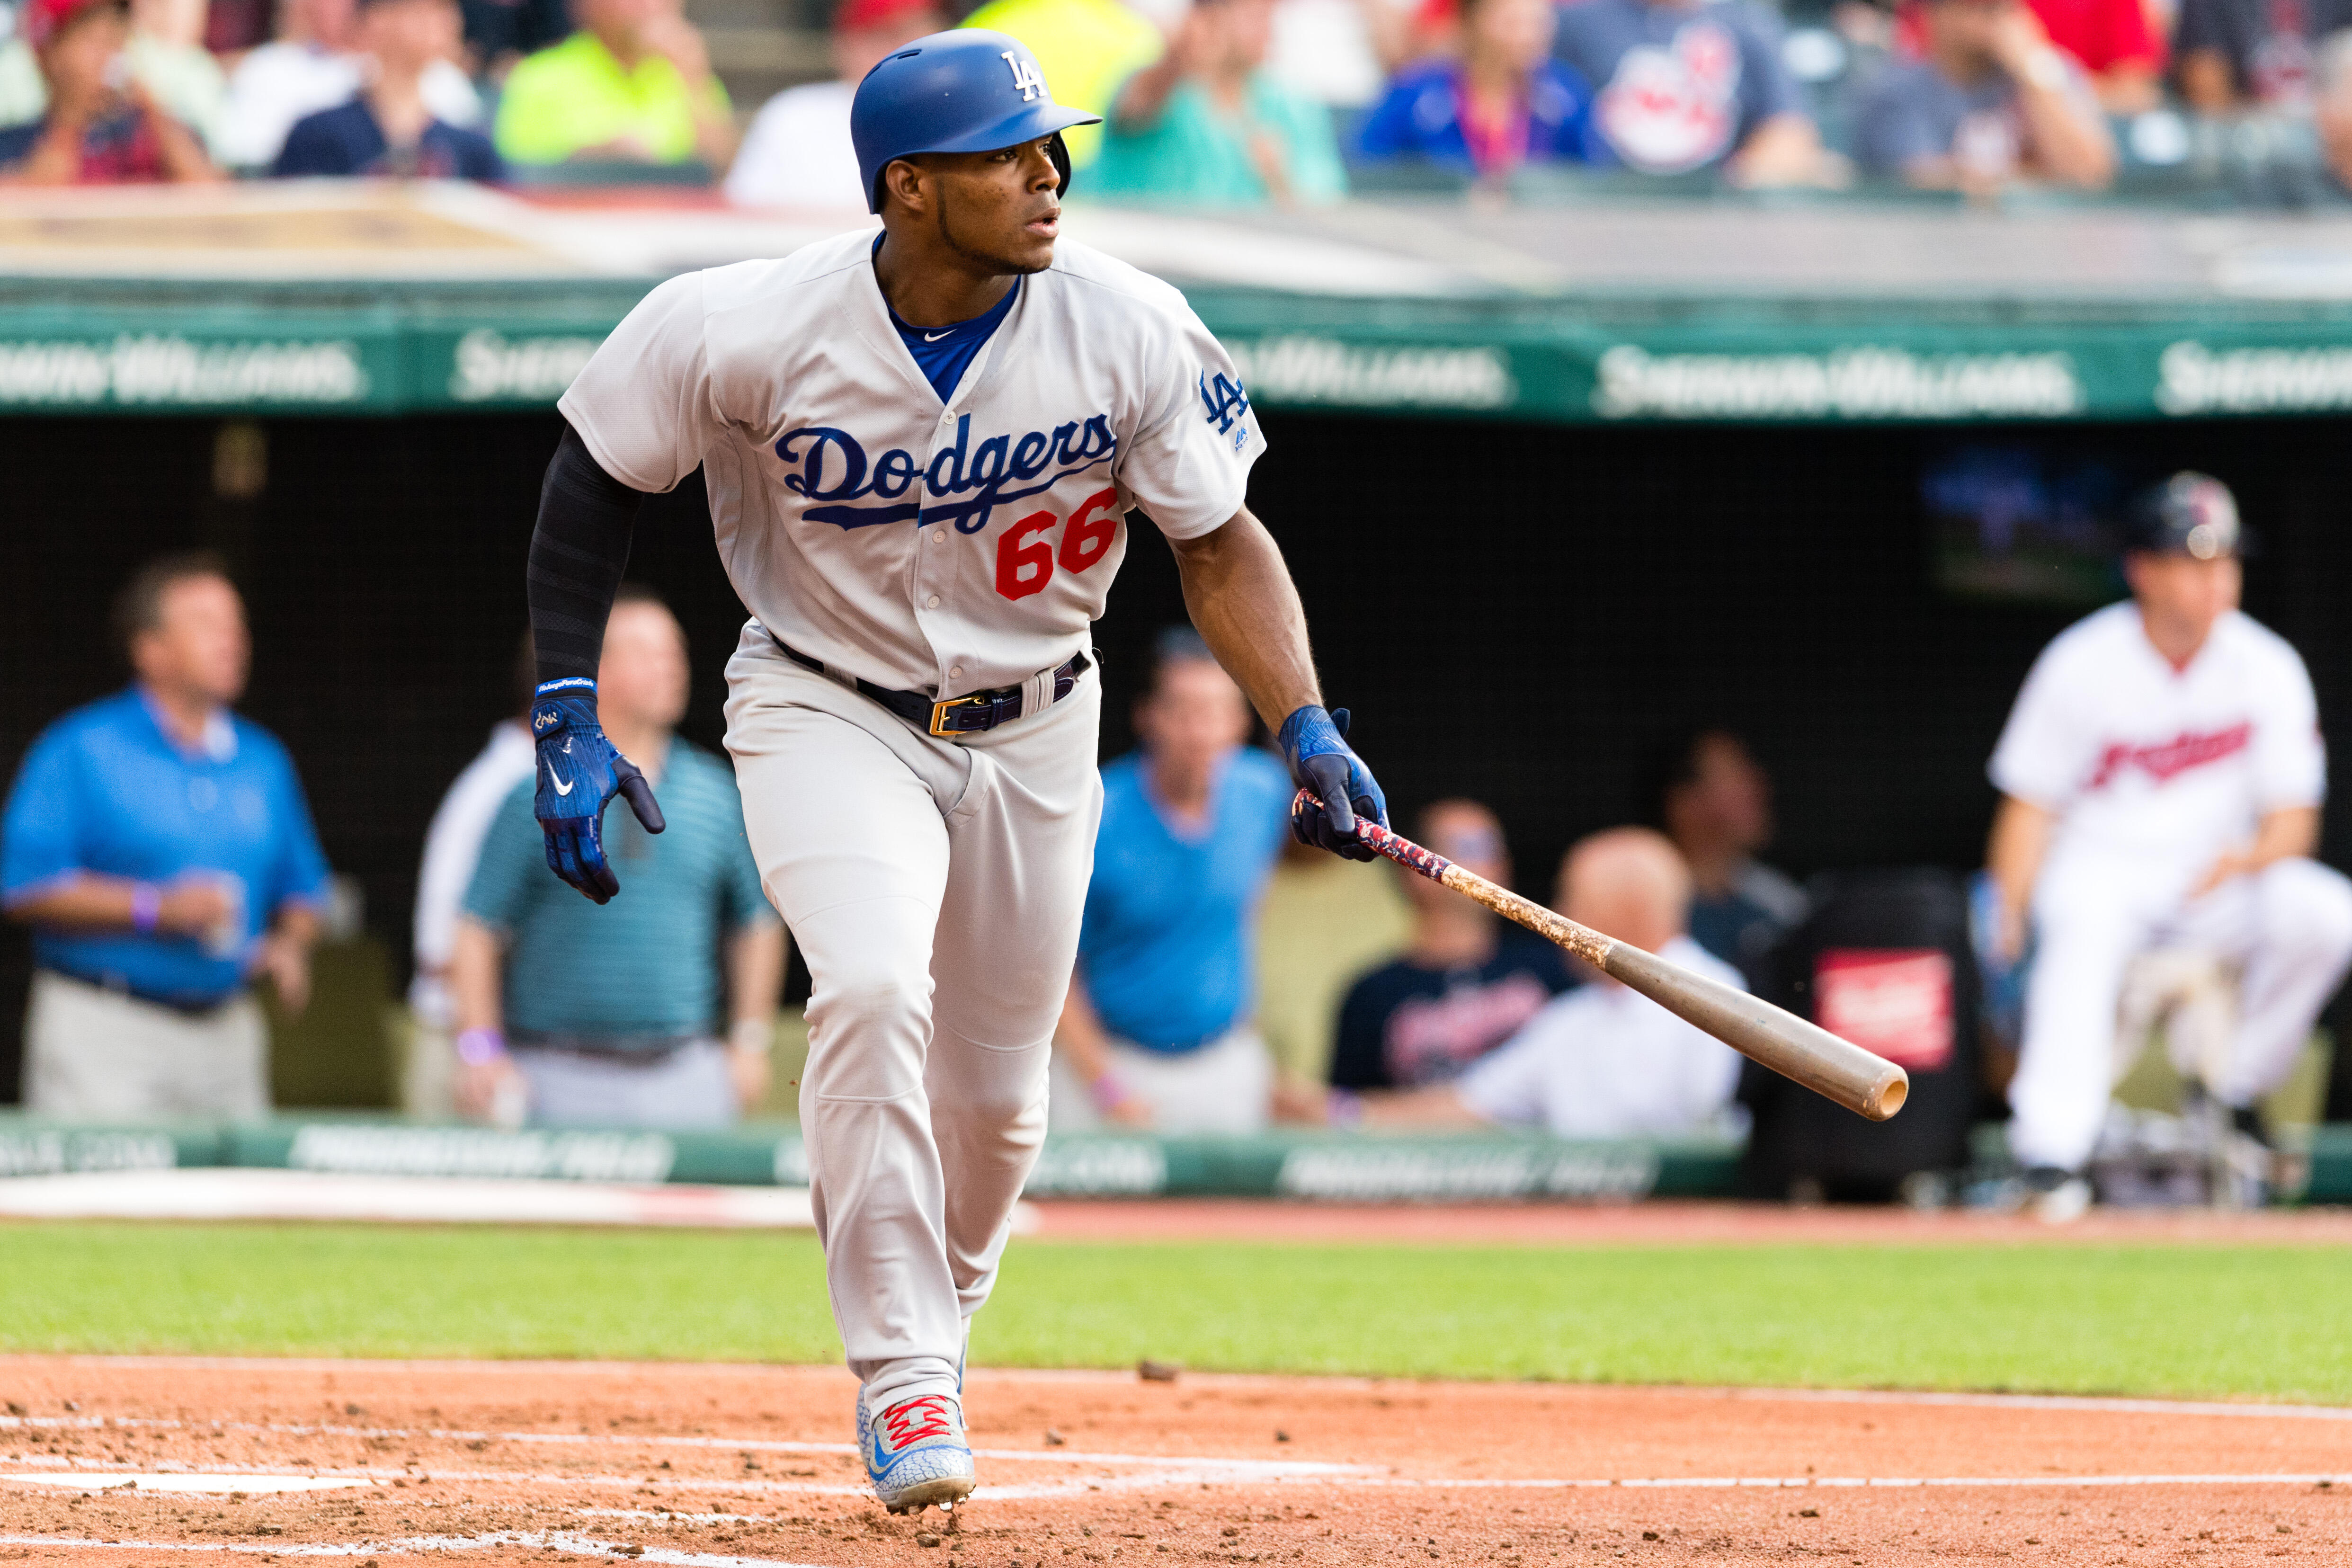 CLEVELAND, OH - JUNE 13: Yasiel Puig #66 of the Los Angeles Dodgers hits a two run home run during the second inning against the Cleveland Indians at Progressive Field on June 13, 2017 in Cleveland, Ohio. (Photo by Jason Miller/Getty Images)